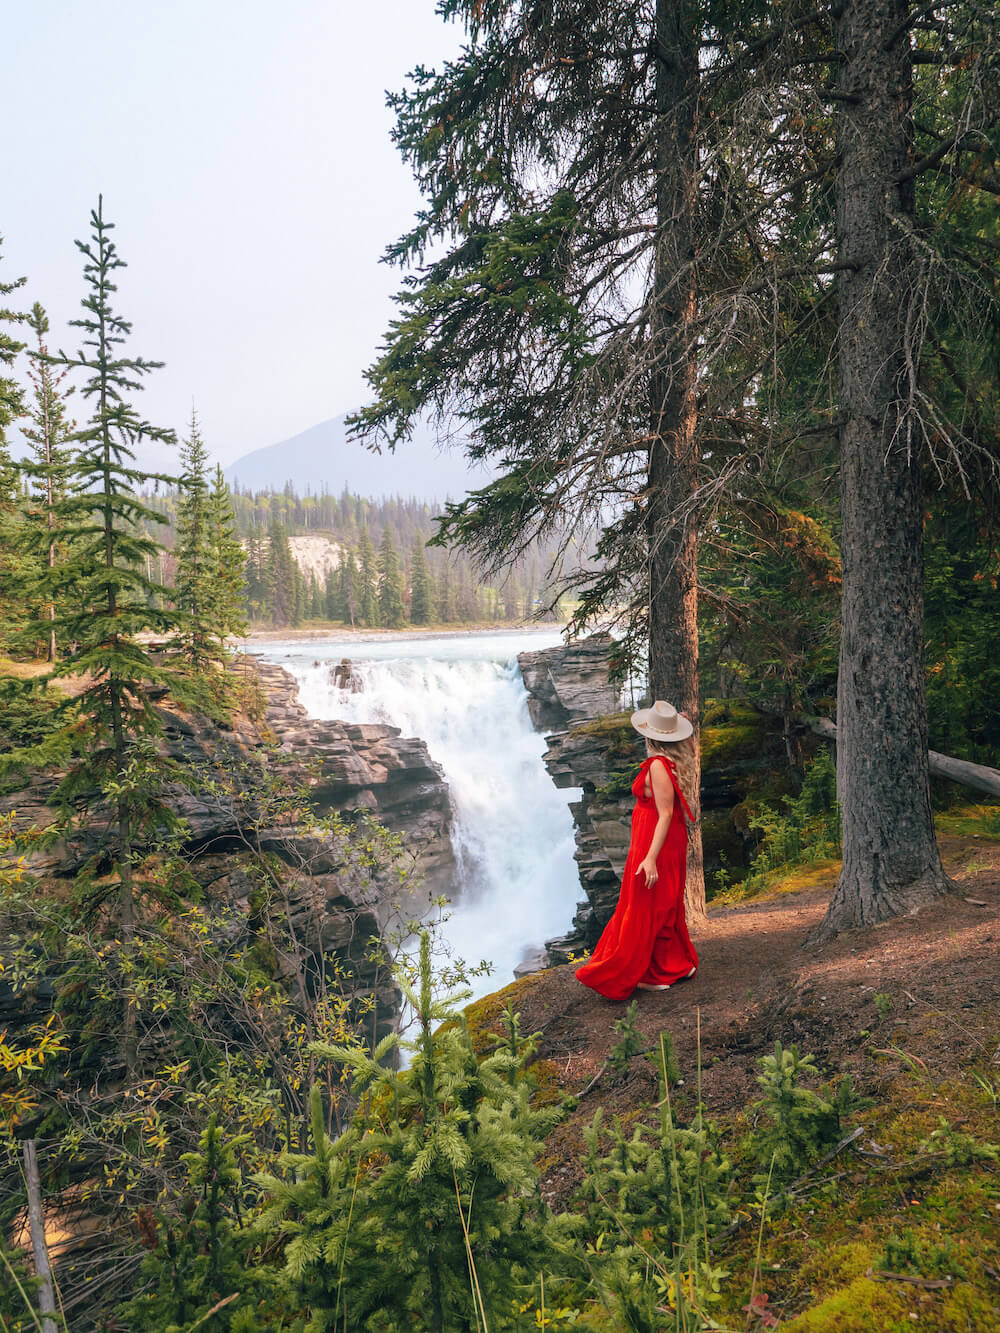 It's no surprise that Jasper National Park has some pretty incredible hikes. Being surrounded by mountains, lakes and wildlife basically screams amazing hiking opportunities ahead! But which hikes should you do when visiting Jasper? This guide lists the best hikes in Jasper National Park by skill level, now all you have to do is choose! Pictured here: Sunwapta Falls Trail